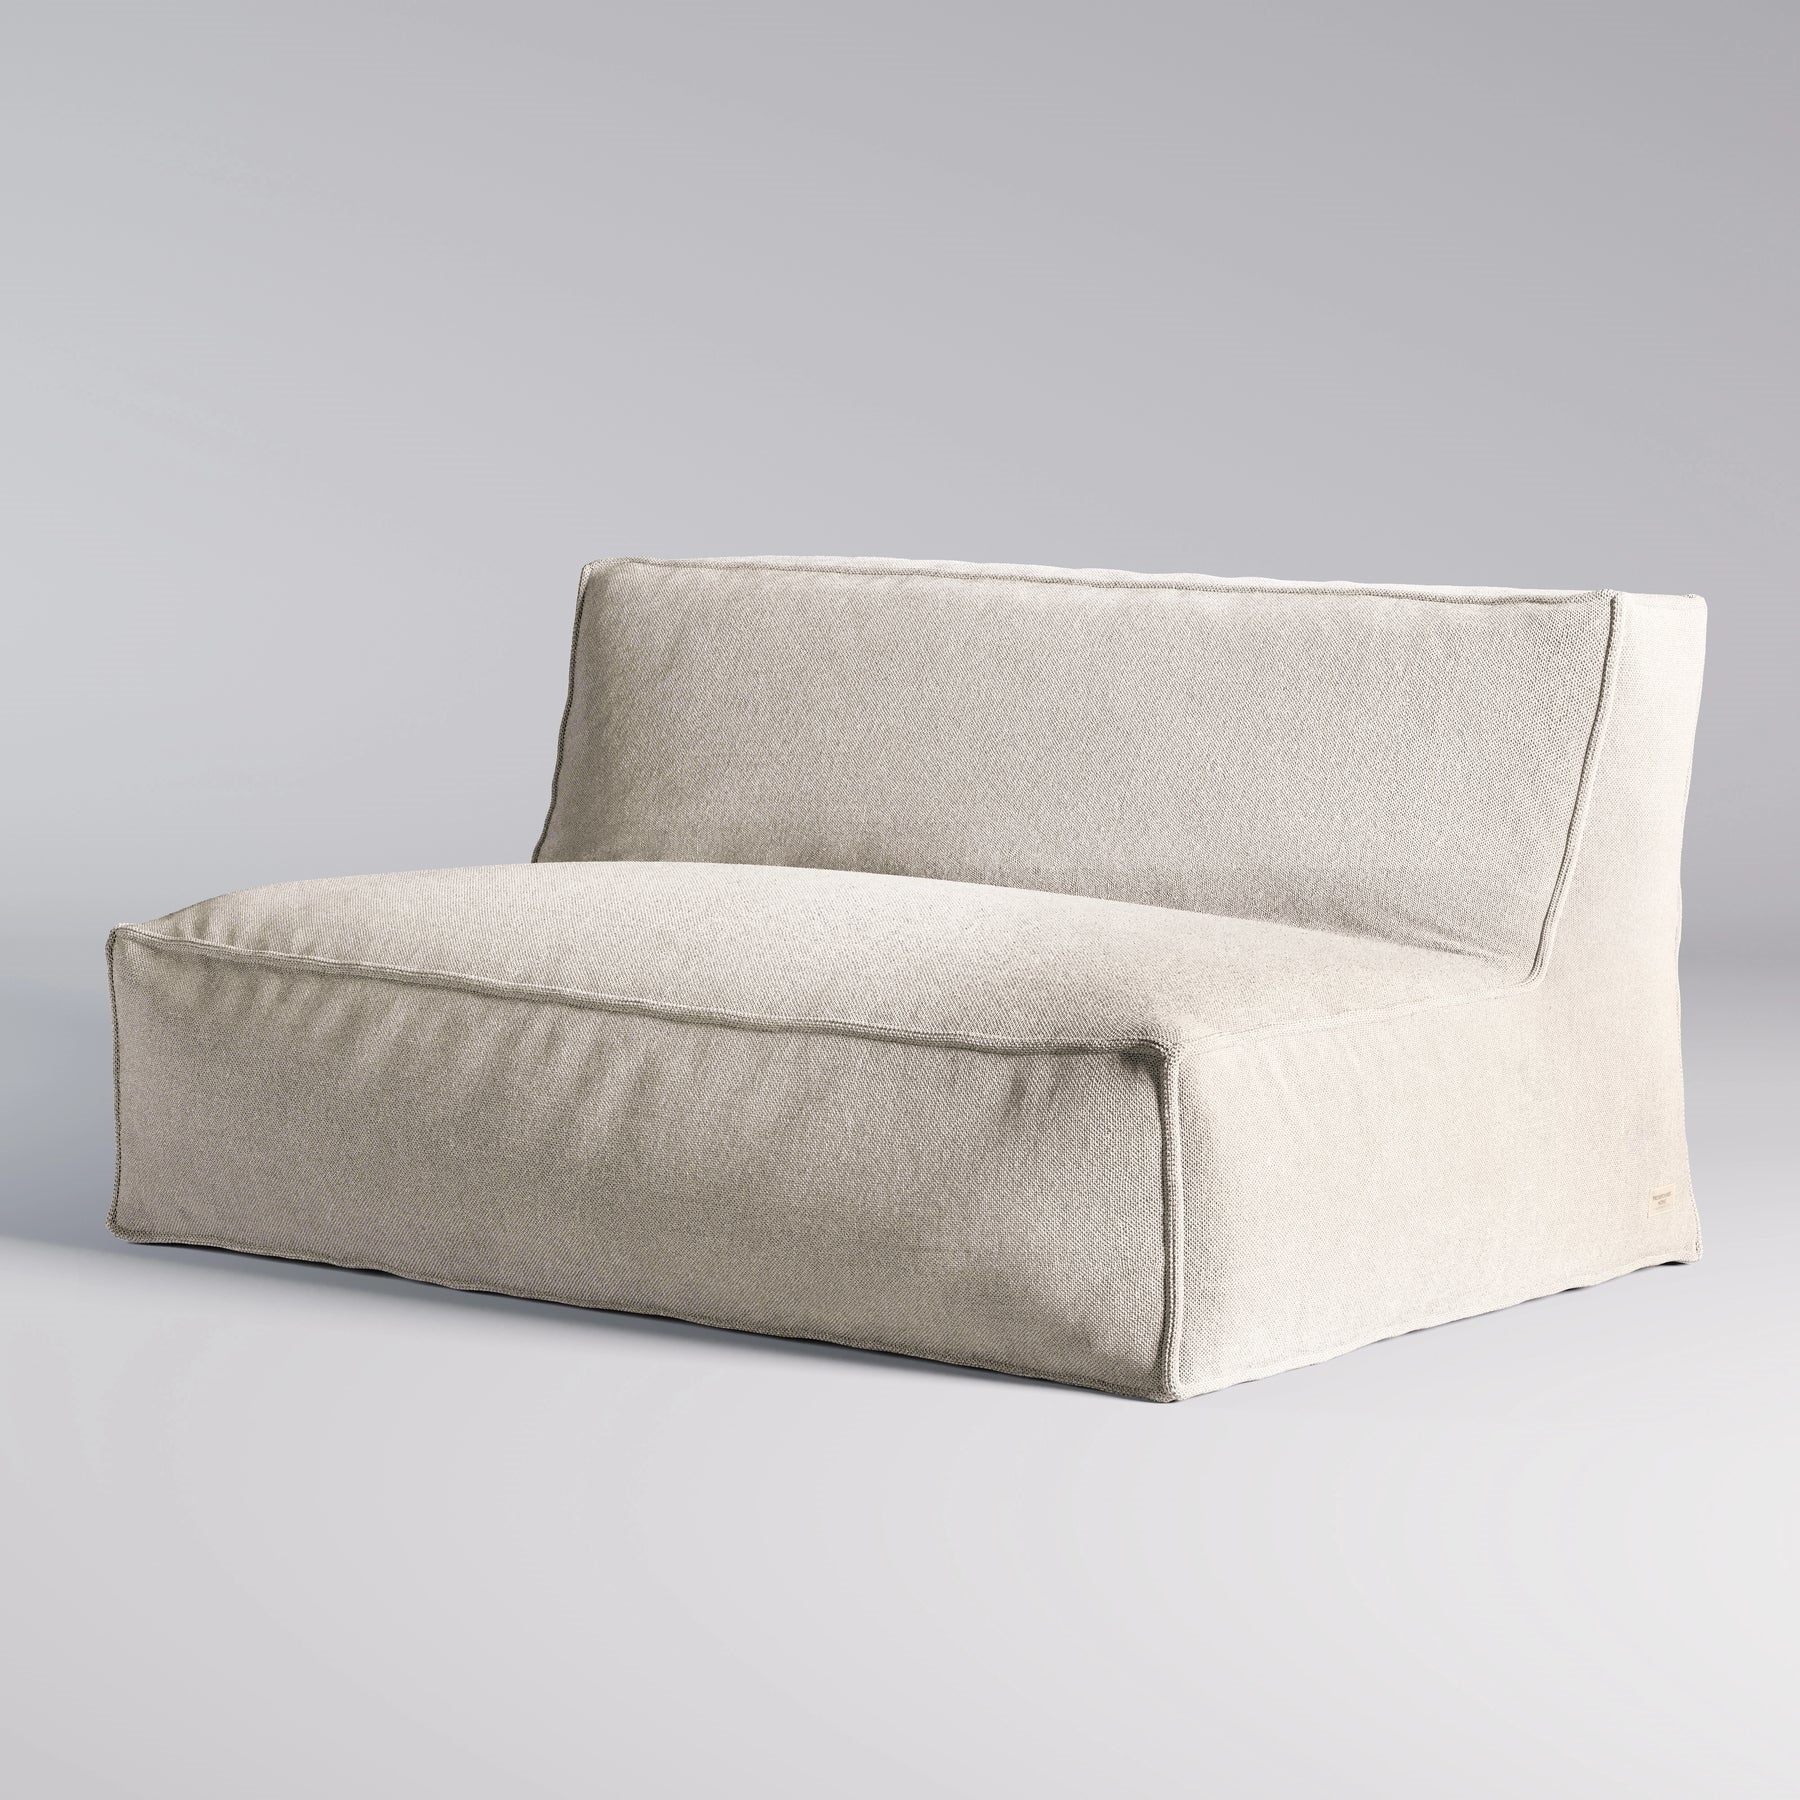 TROISPOMMESHOME 2 pers. loungesofa - beige stof